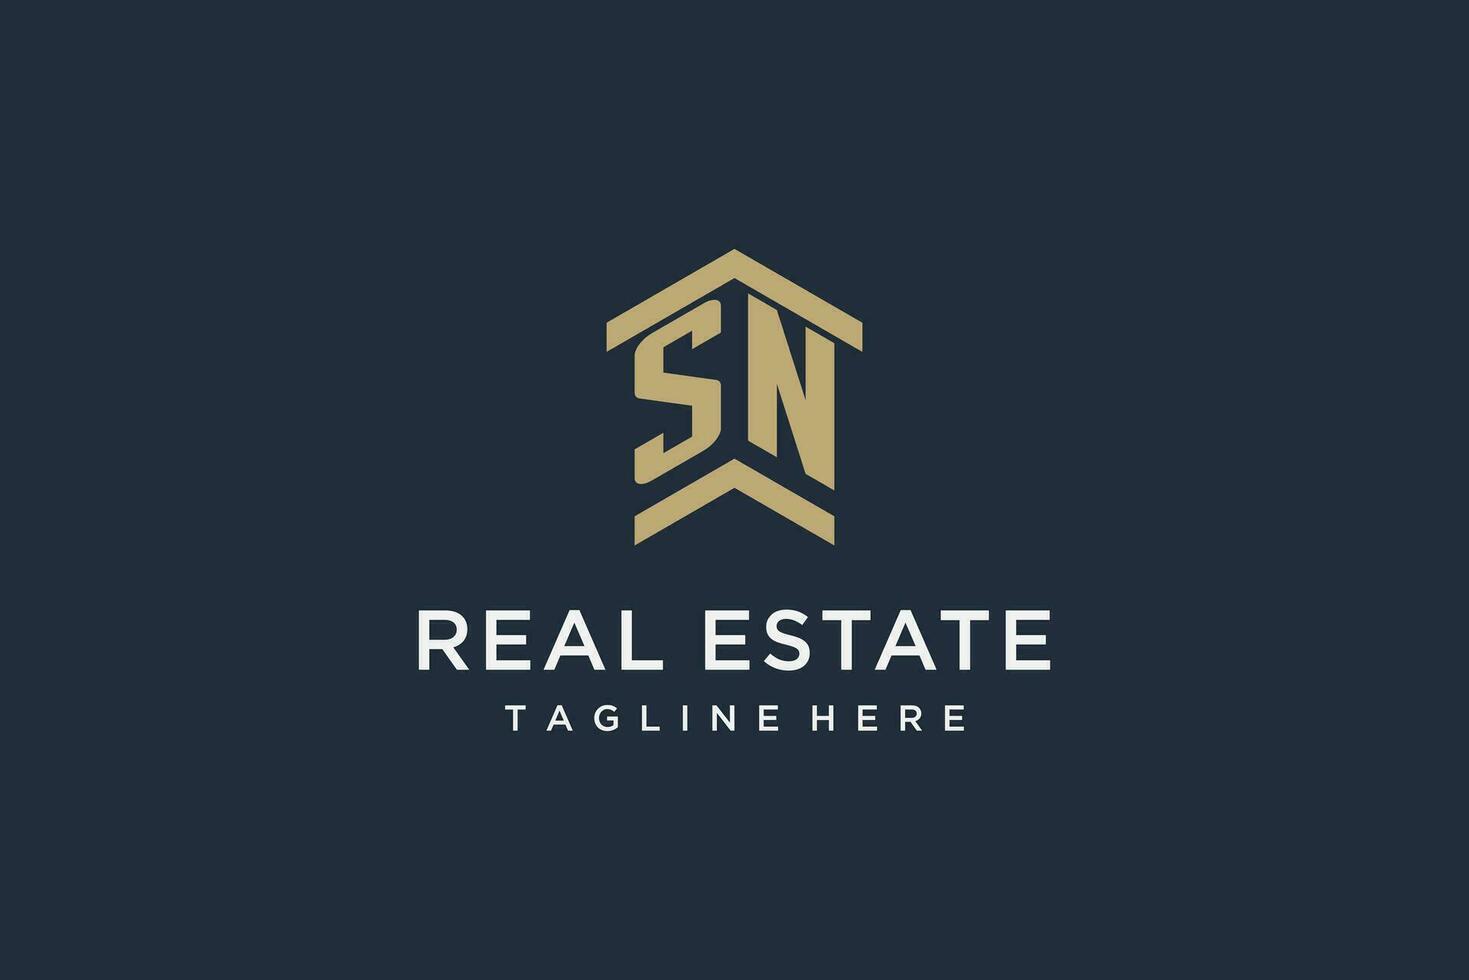 Initial SN logo for real estate with simple and creative house roof icon logo design ideas vector